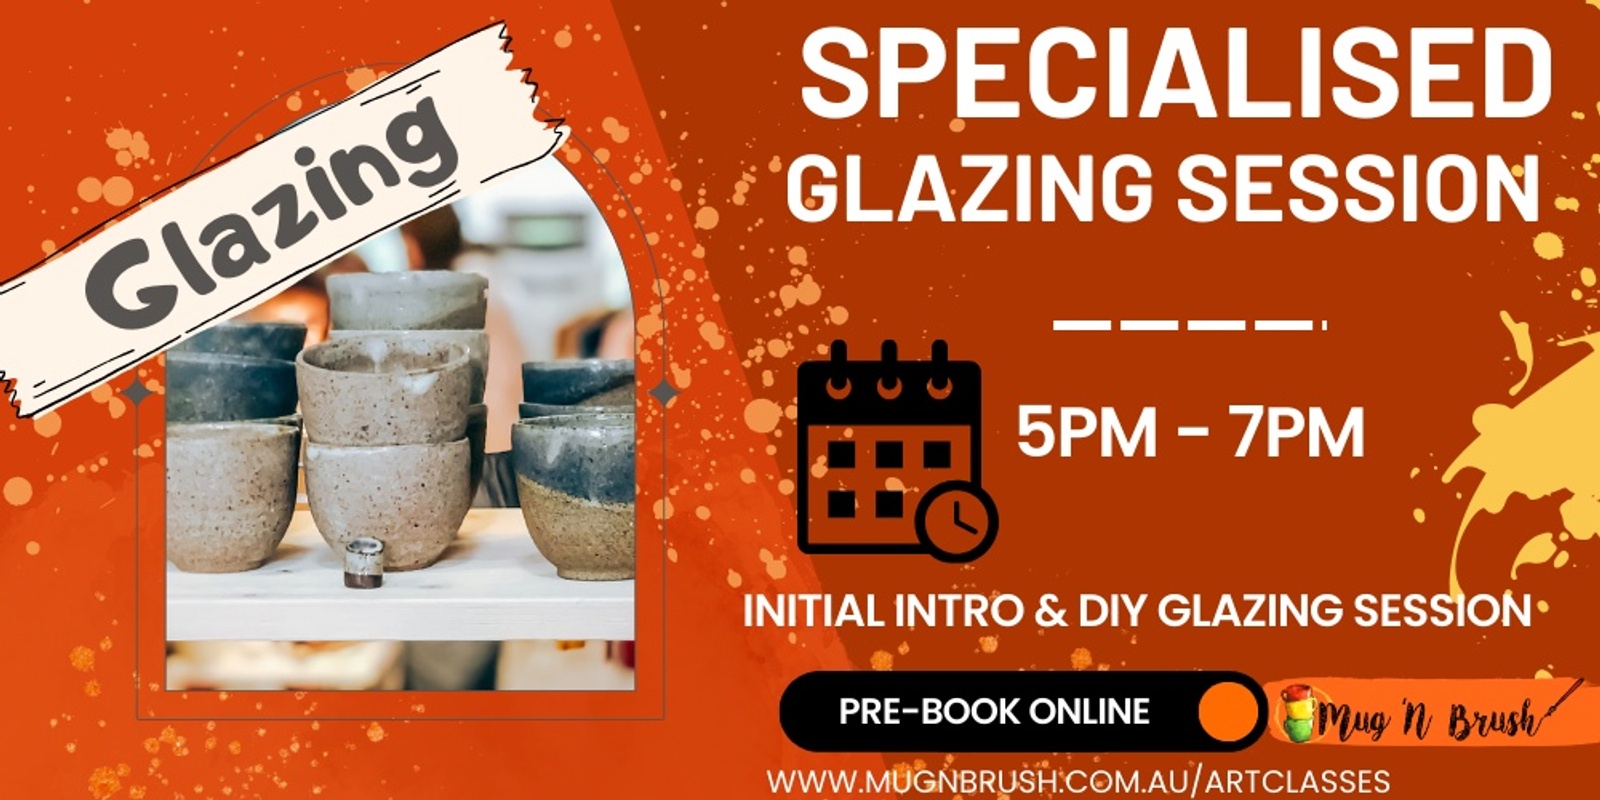 Banner image for Specialised Glazing Session - May